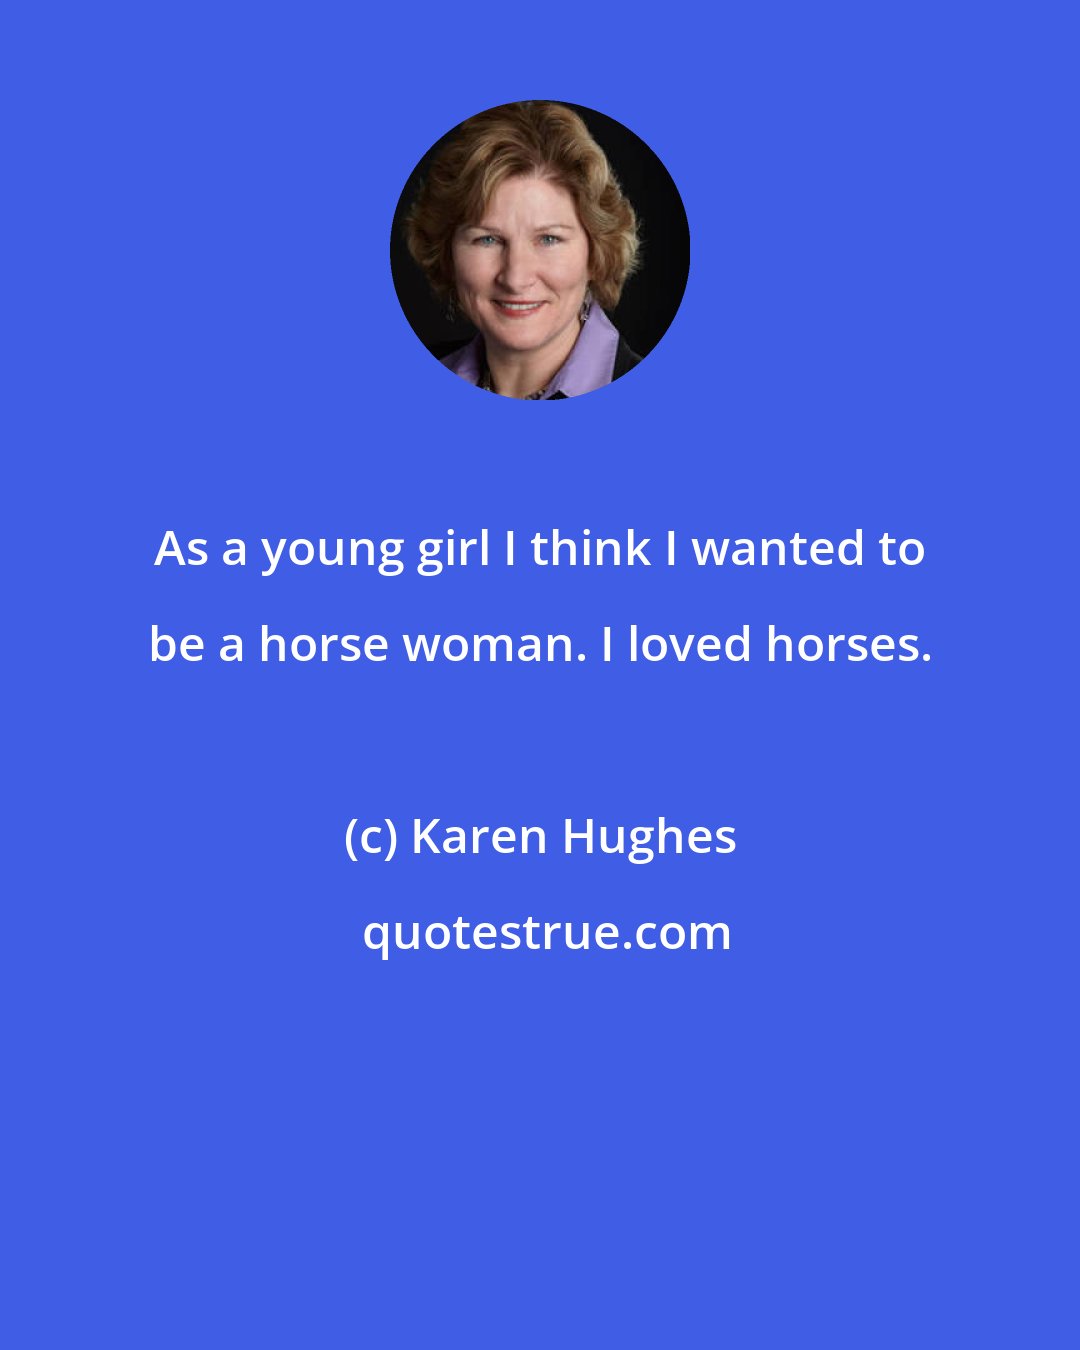 Karen Hughes: As a young girl I think I wanted to be a horse woman. I loved horses.